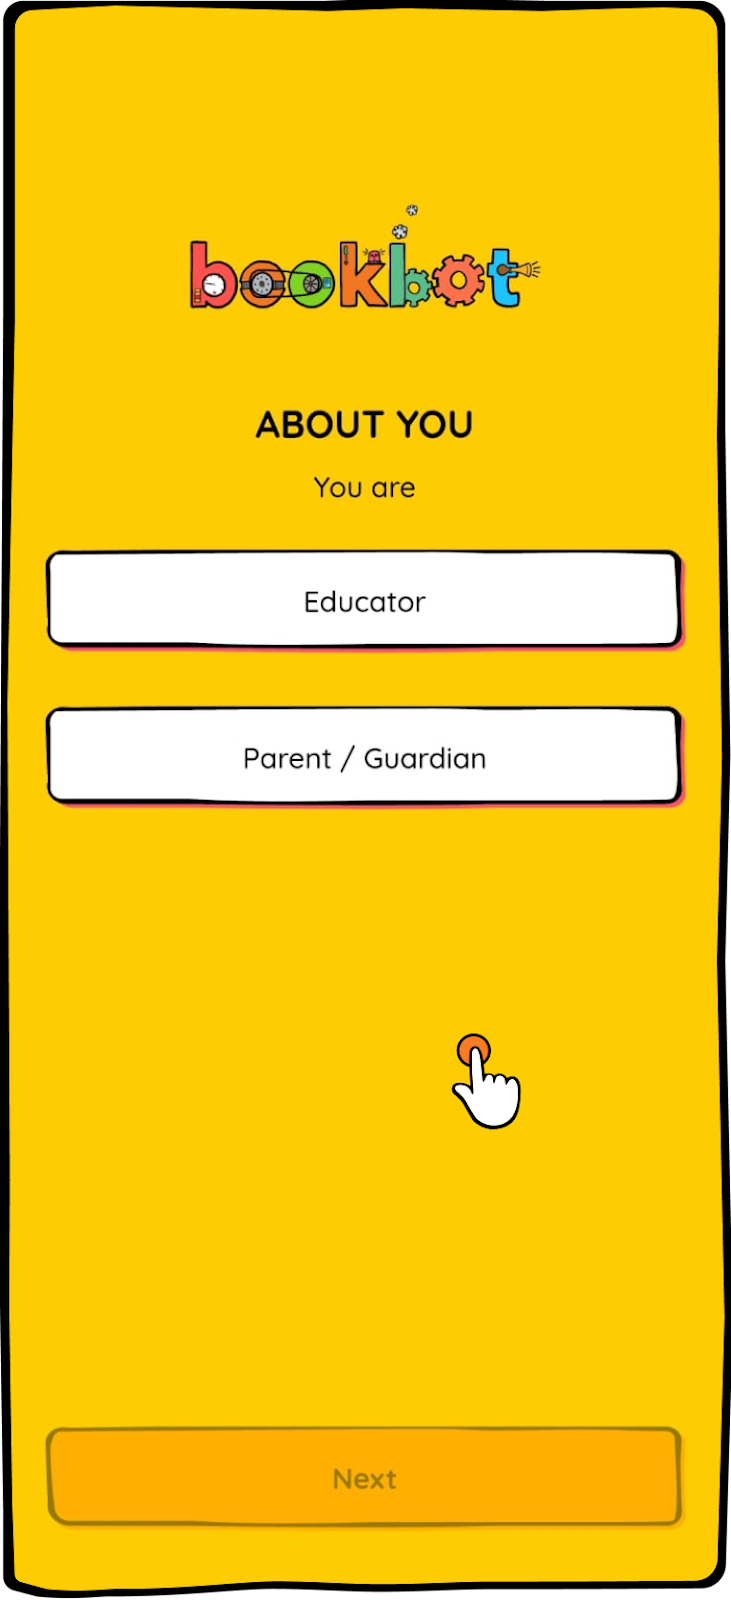 Select whether you are a teacher or parent